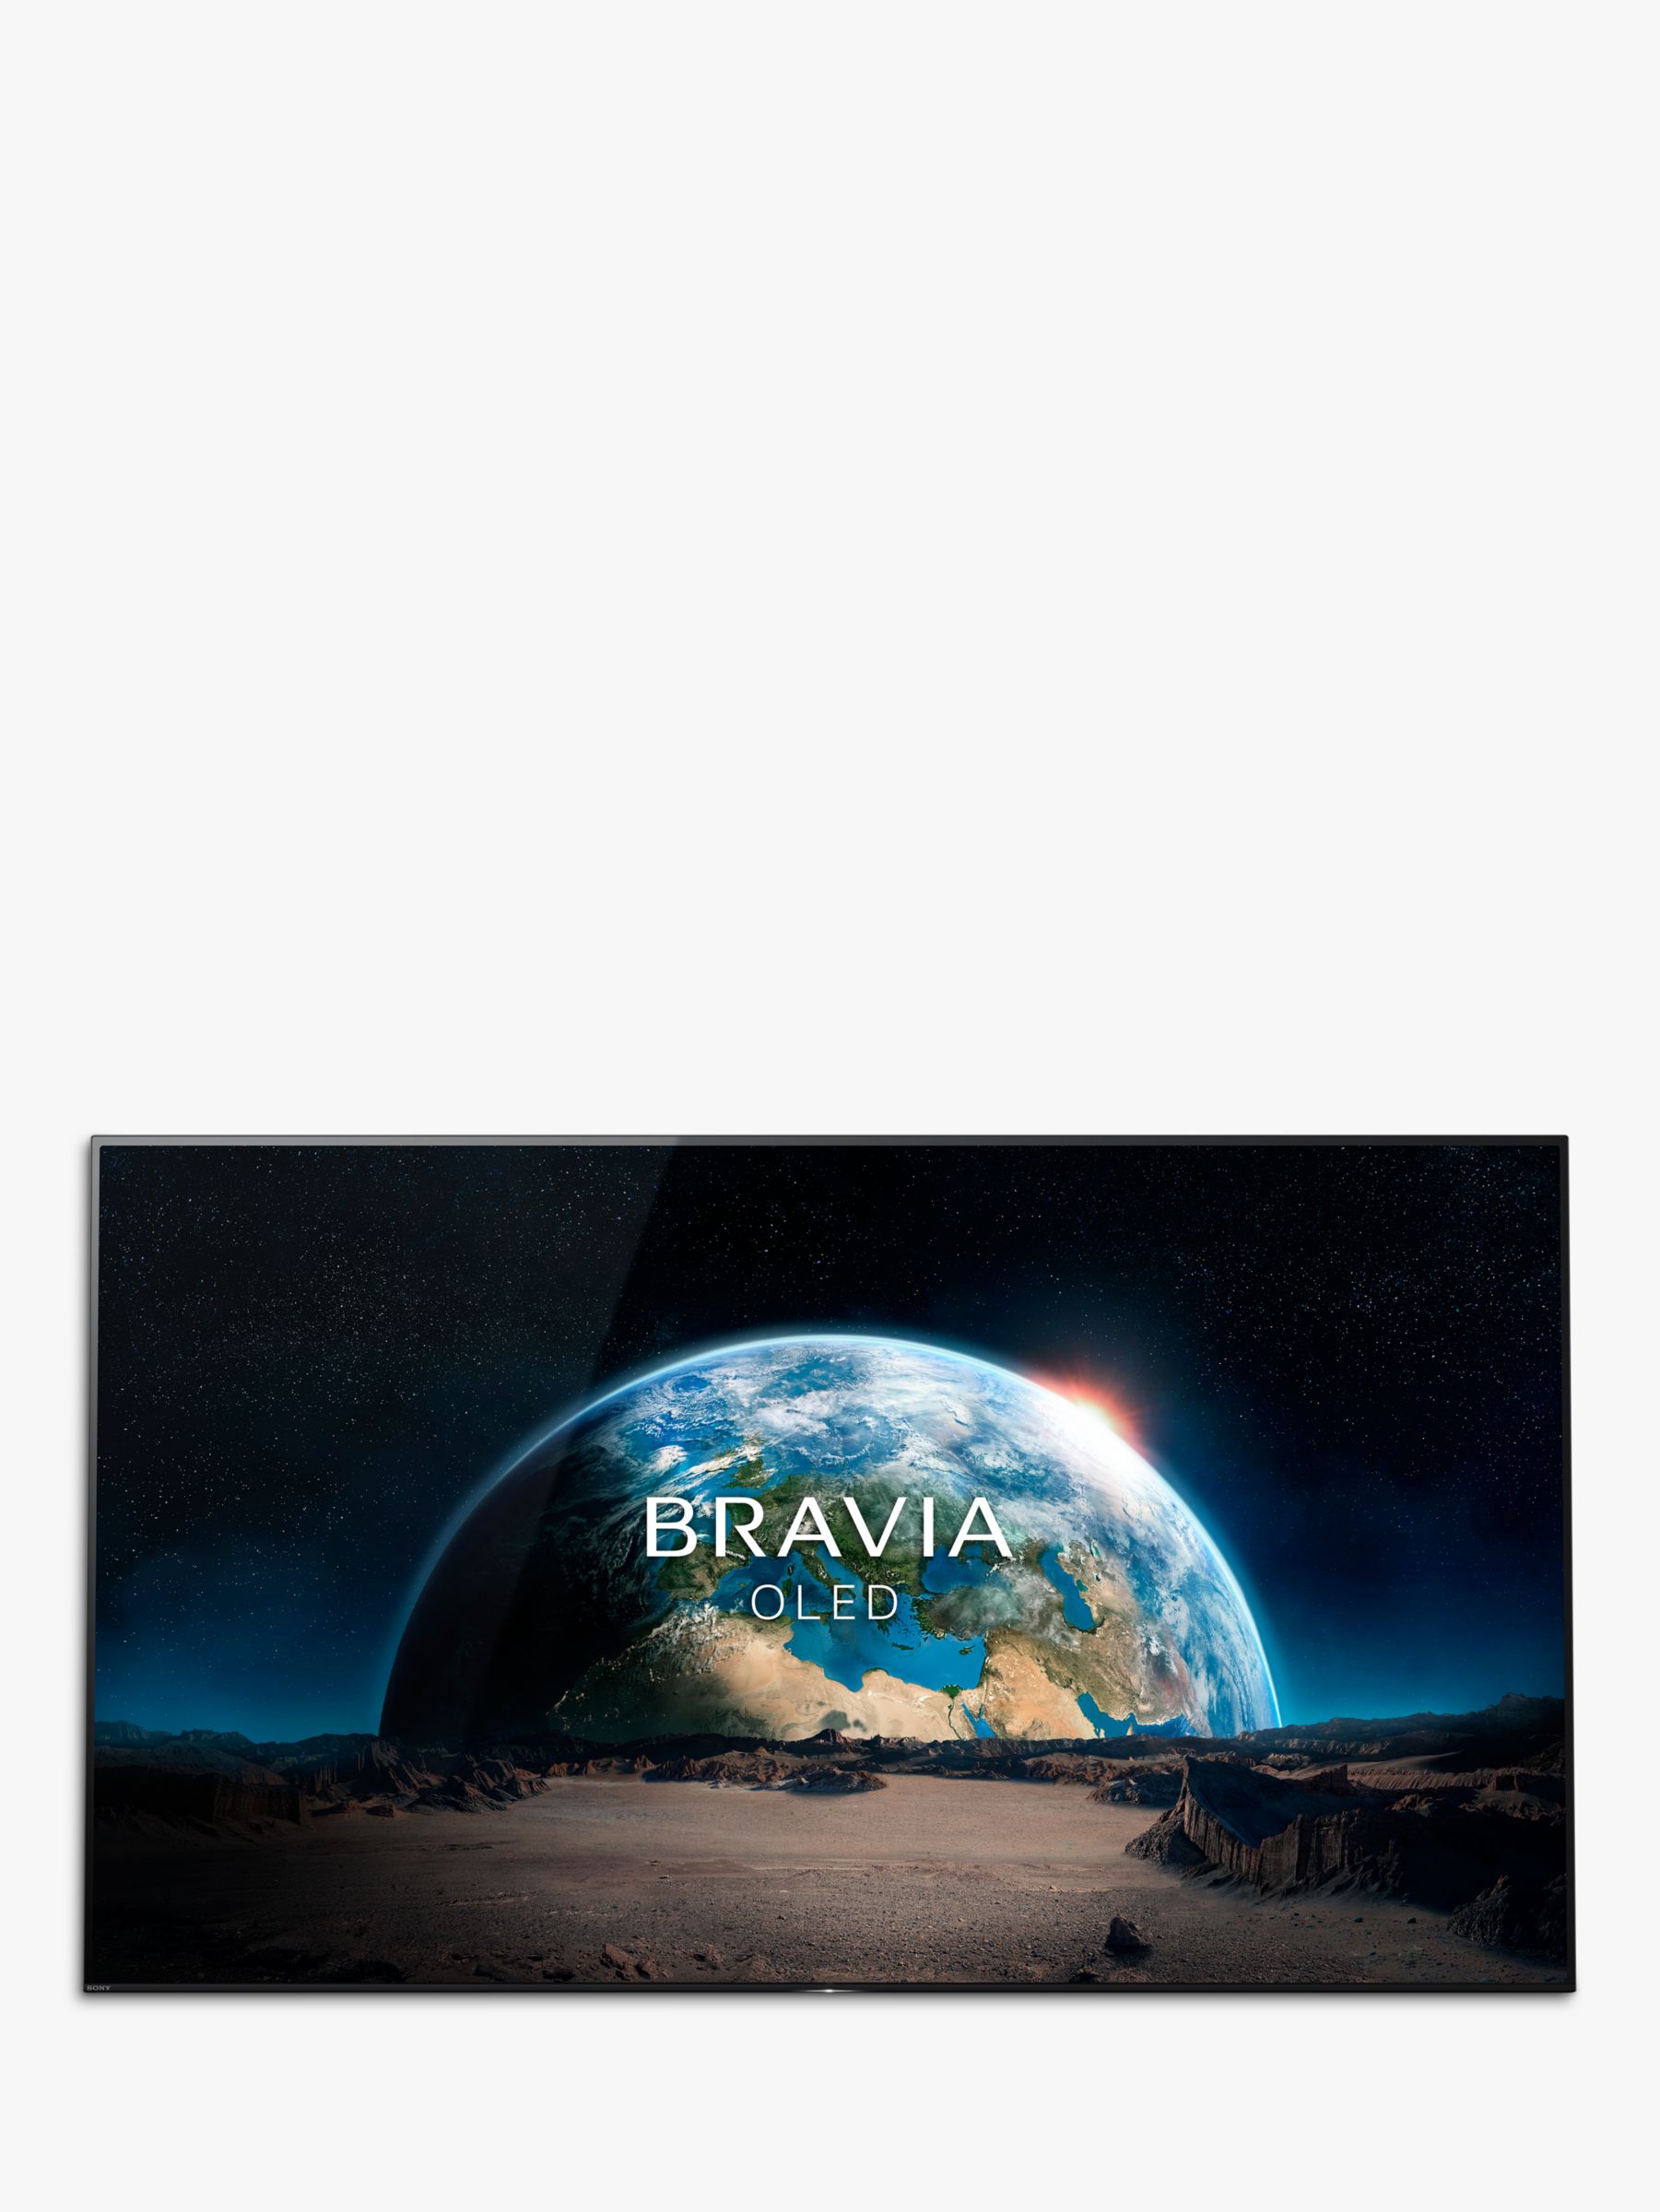 Sony Bravia KD77A1 OLED HDR 4K Ultra HD Smart Android TV, 77 with Freeview HD, Youview, Acoustic Surface & One Slate Design, Black